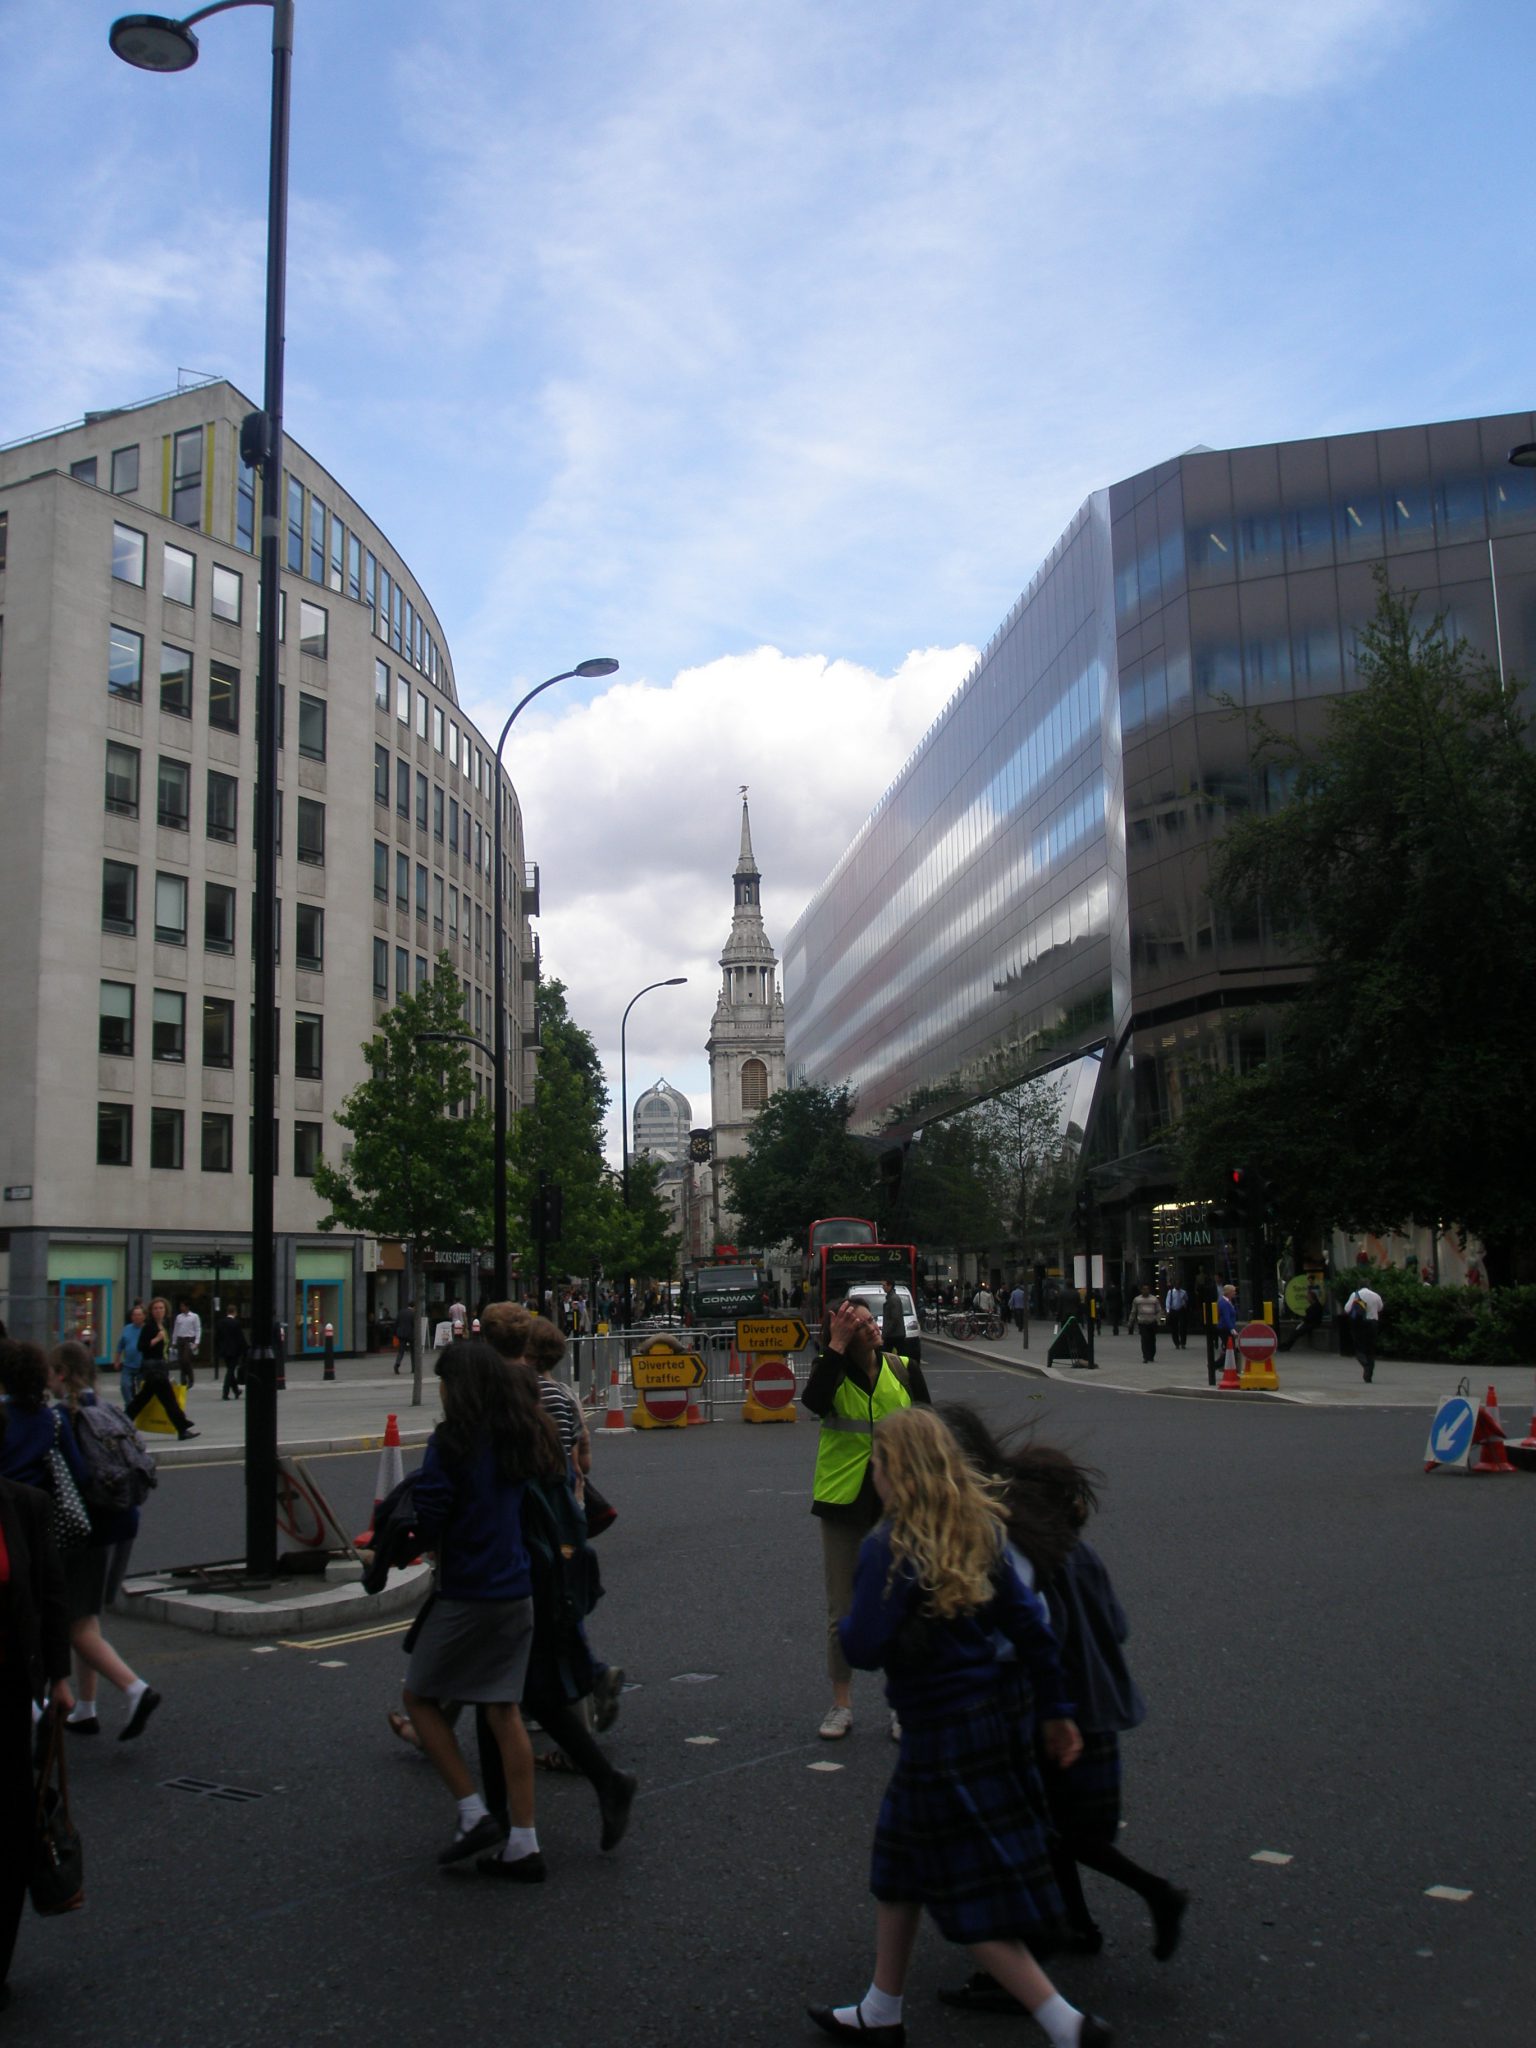 The spire of St.Mary-Le-Bow, is in the distance